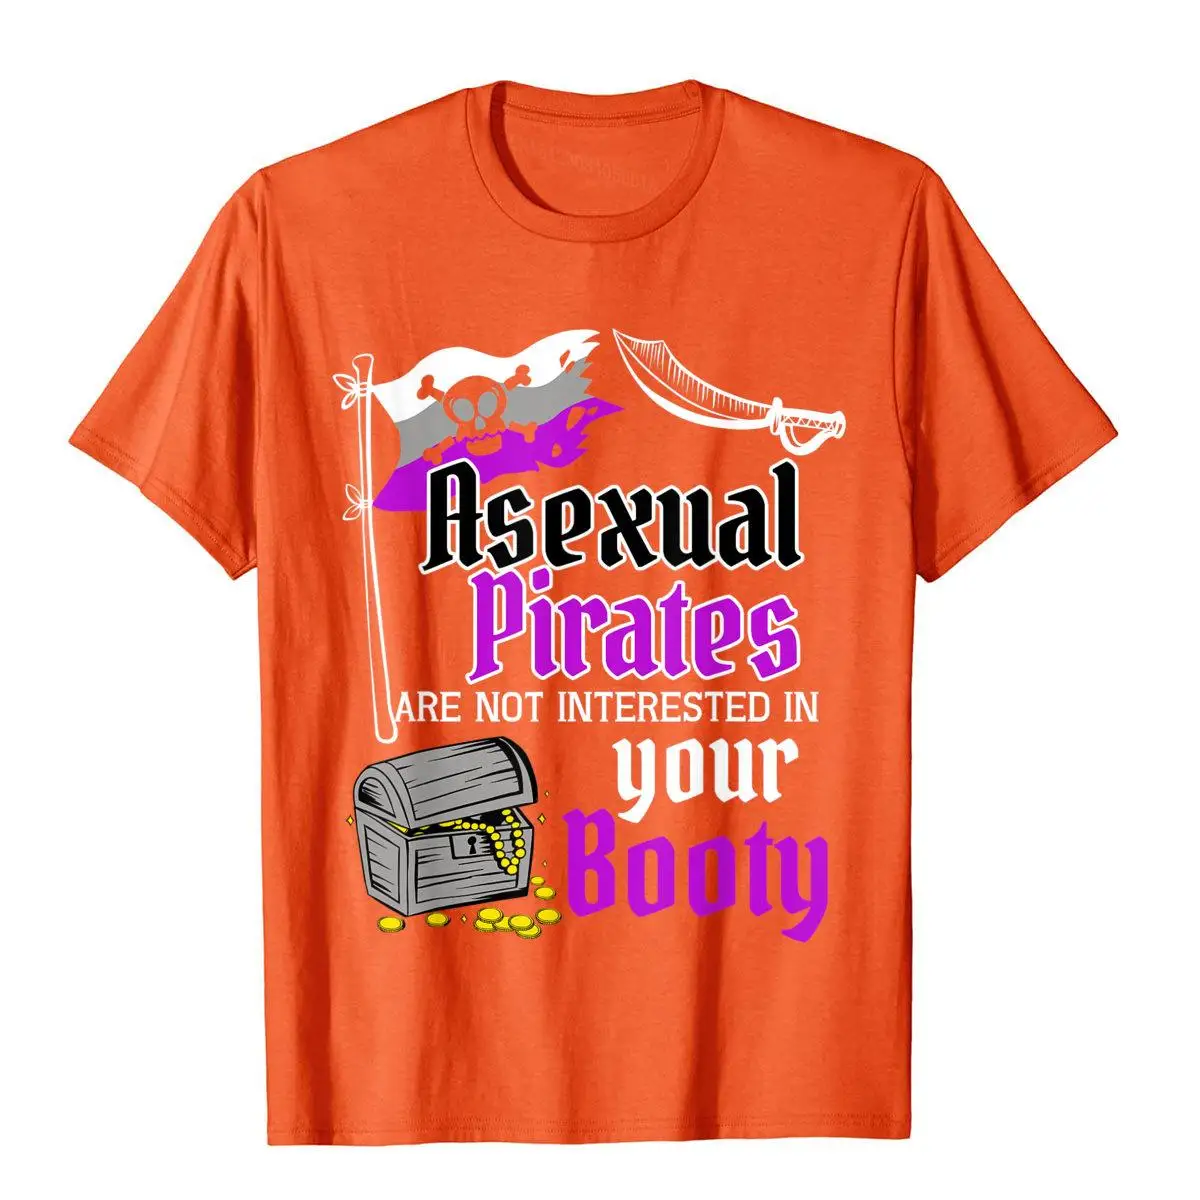 Pansexual Pirates Love All Booty T-Shirt Funny Pride Gift